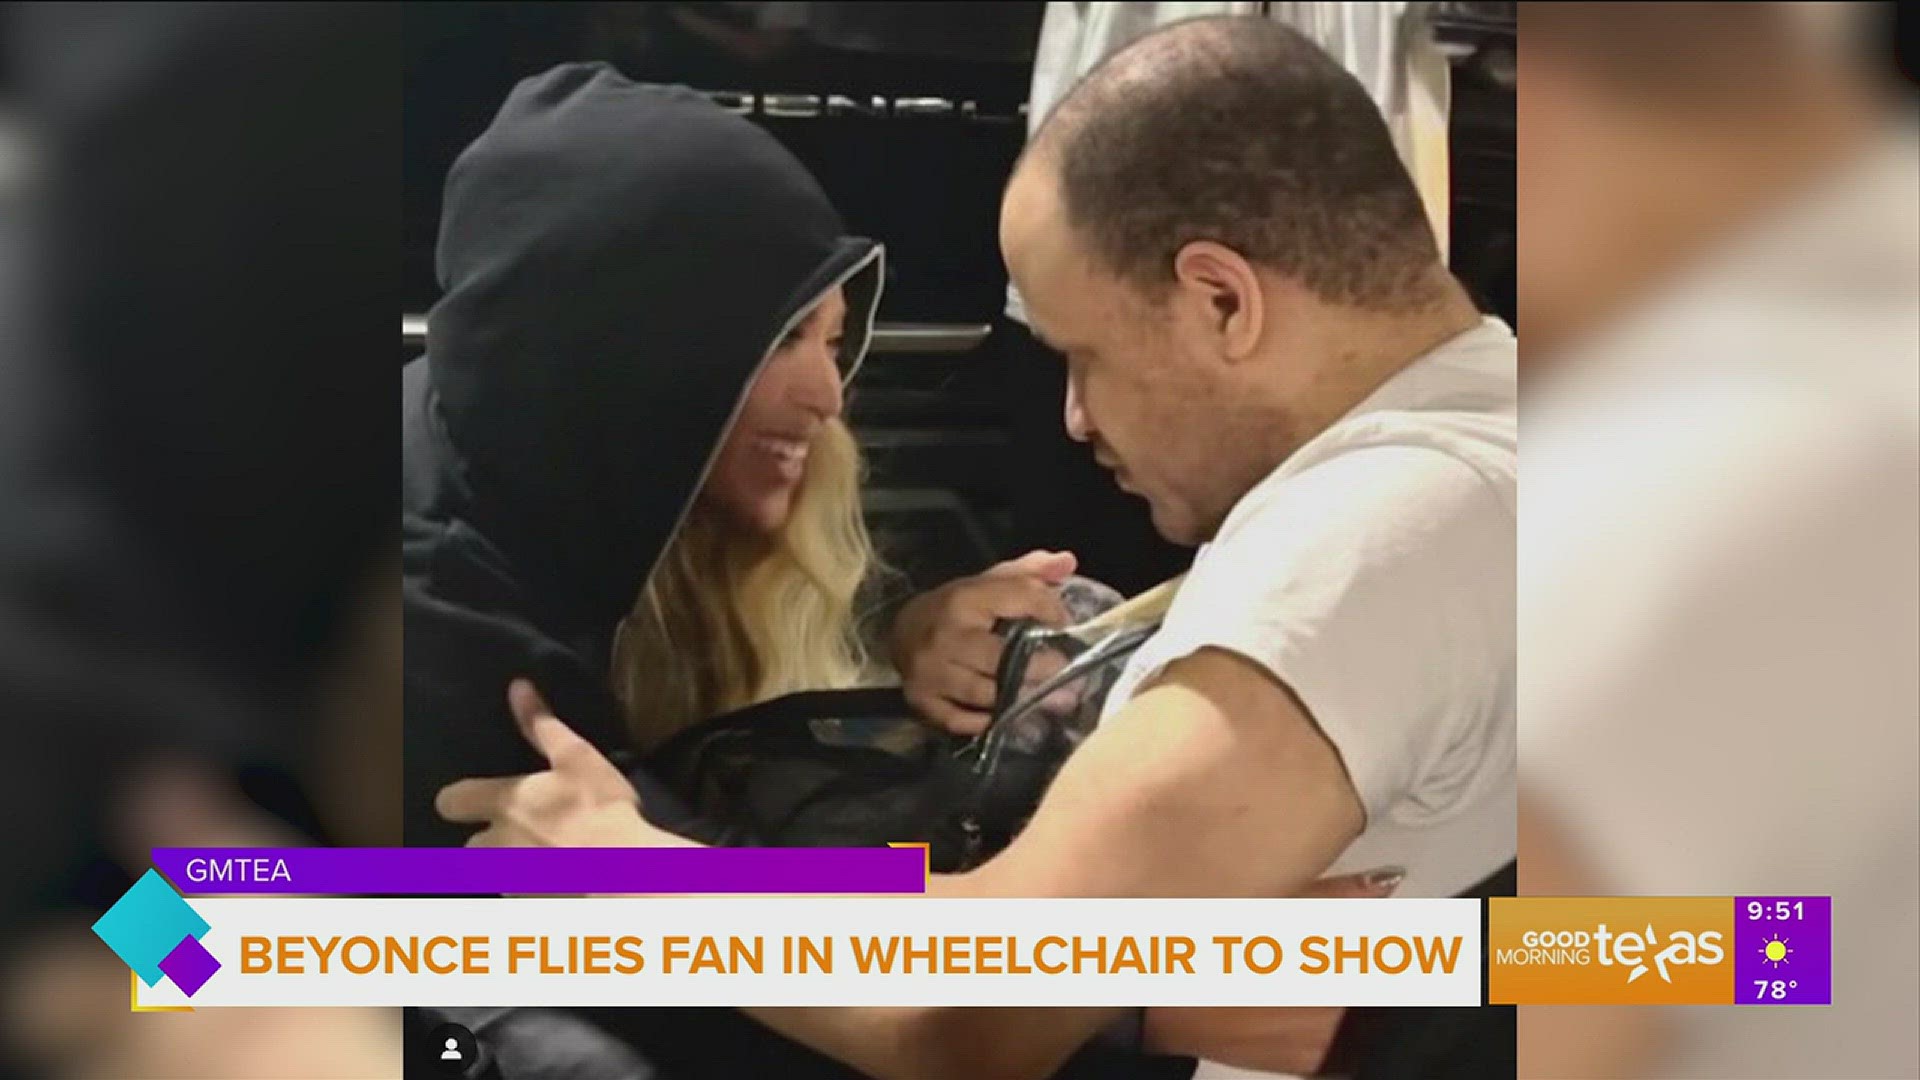 Jon shared on TikTok that his wheelchair was too high to get in his plane to Seattle. His story went abuzz social media, leading him to come face to face with Bey.